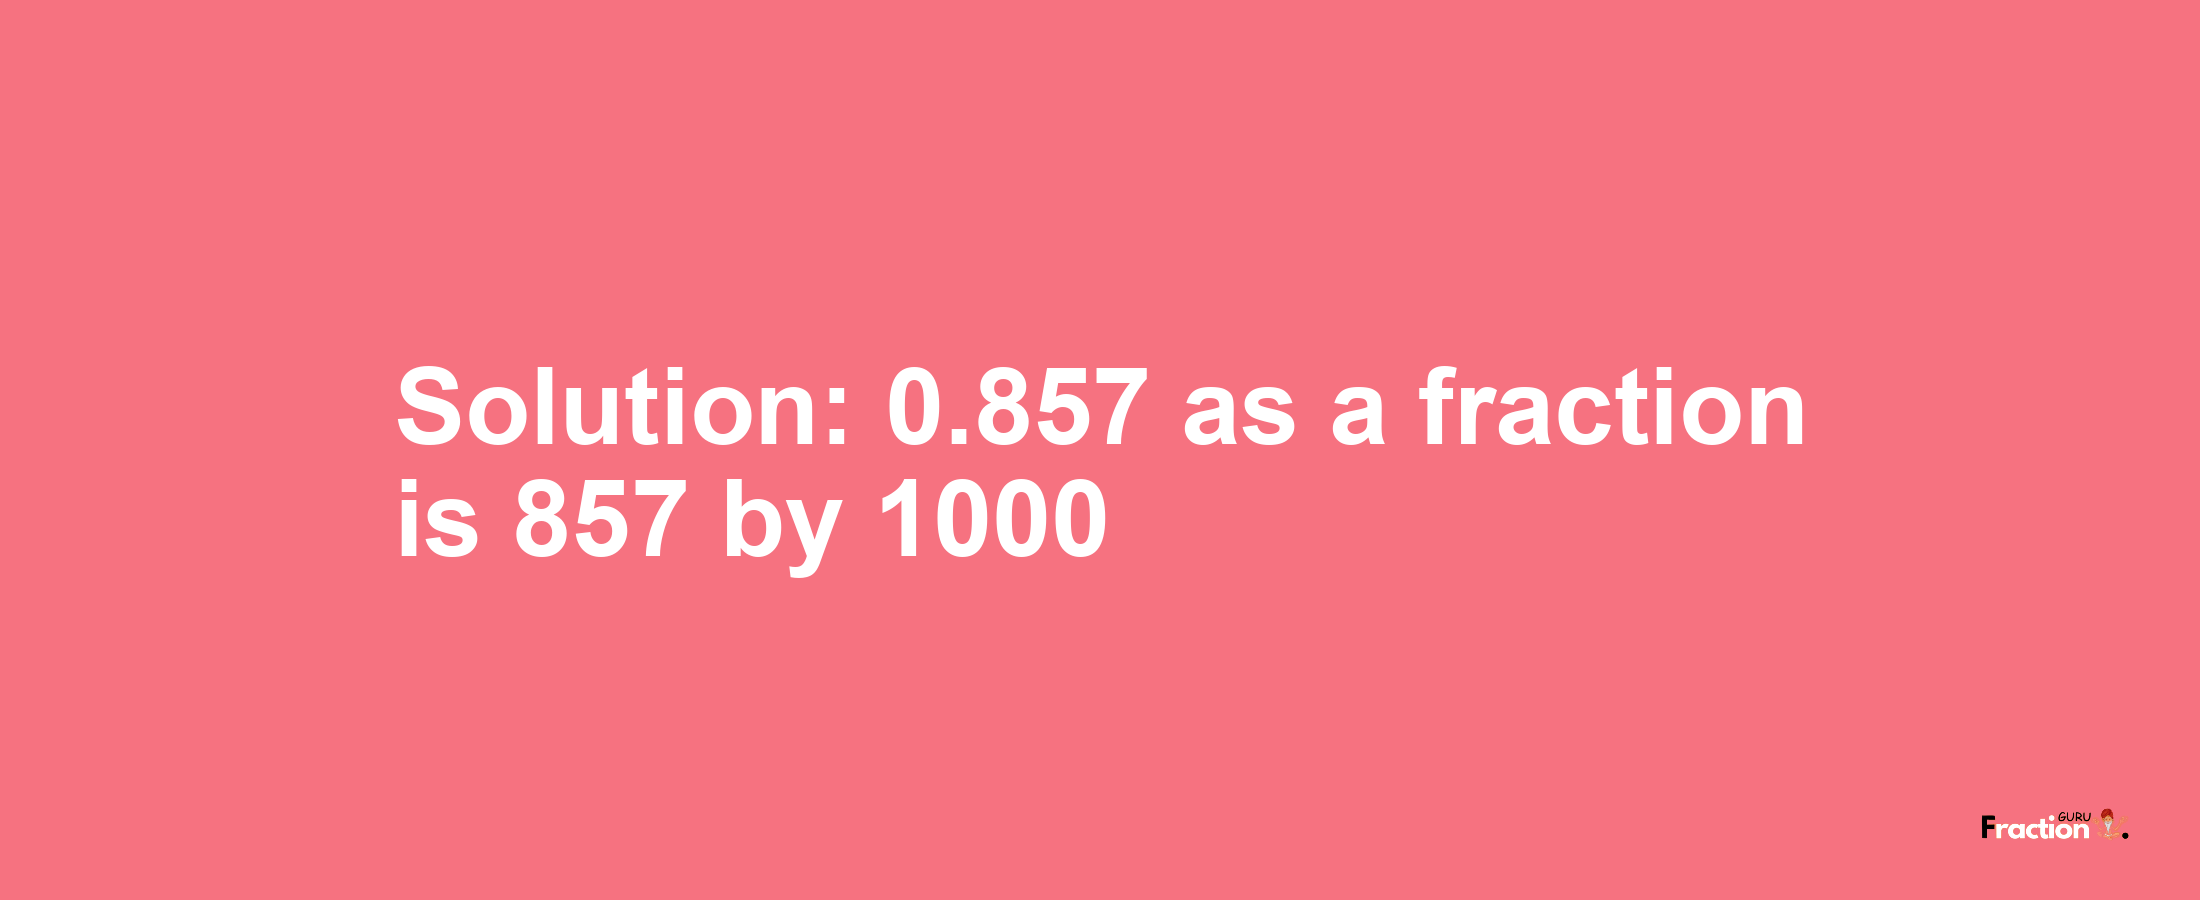 Solution:0.857 as a fraction is 857/1000